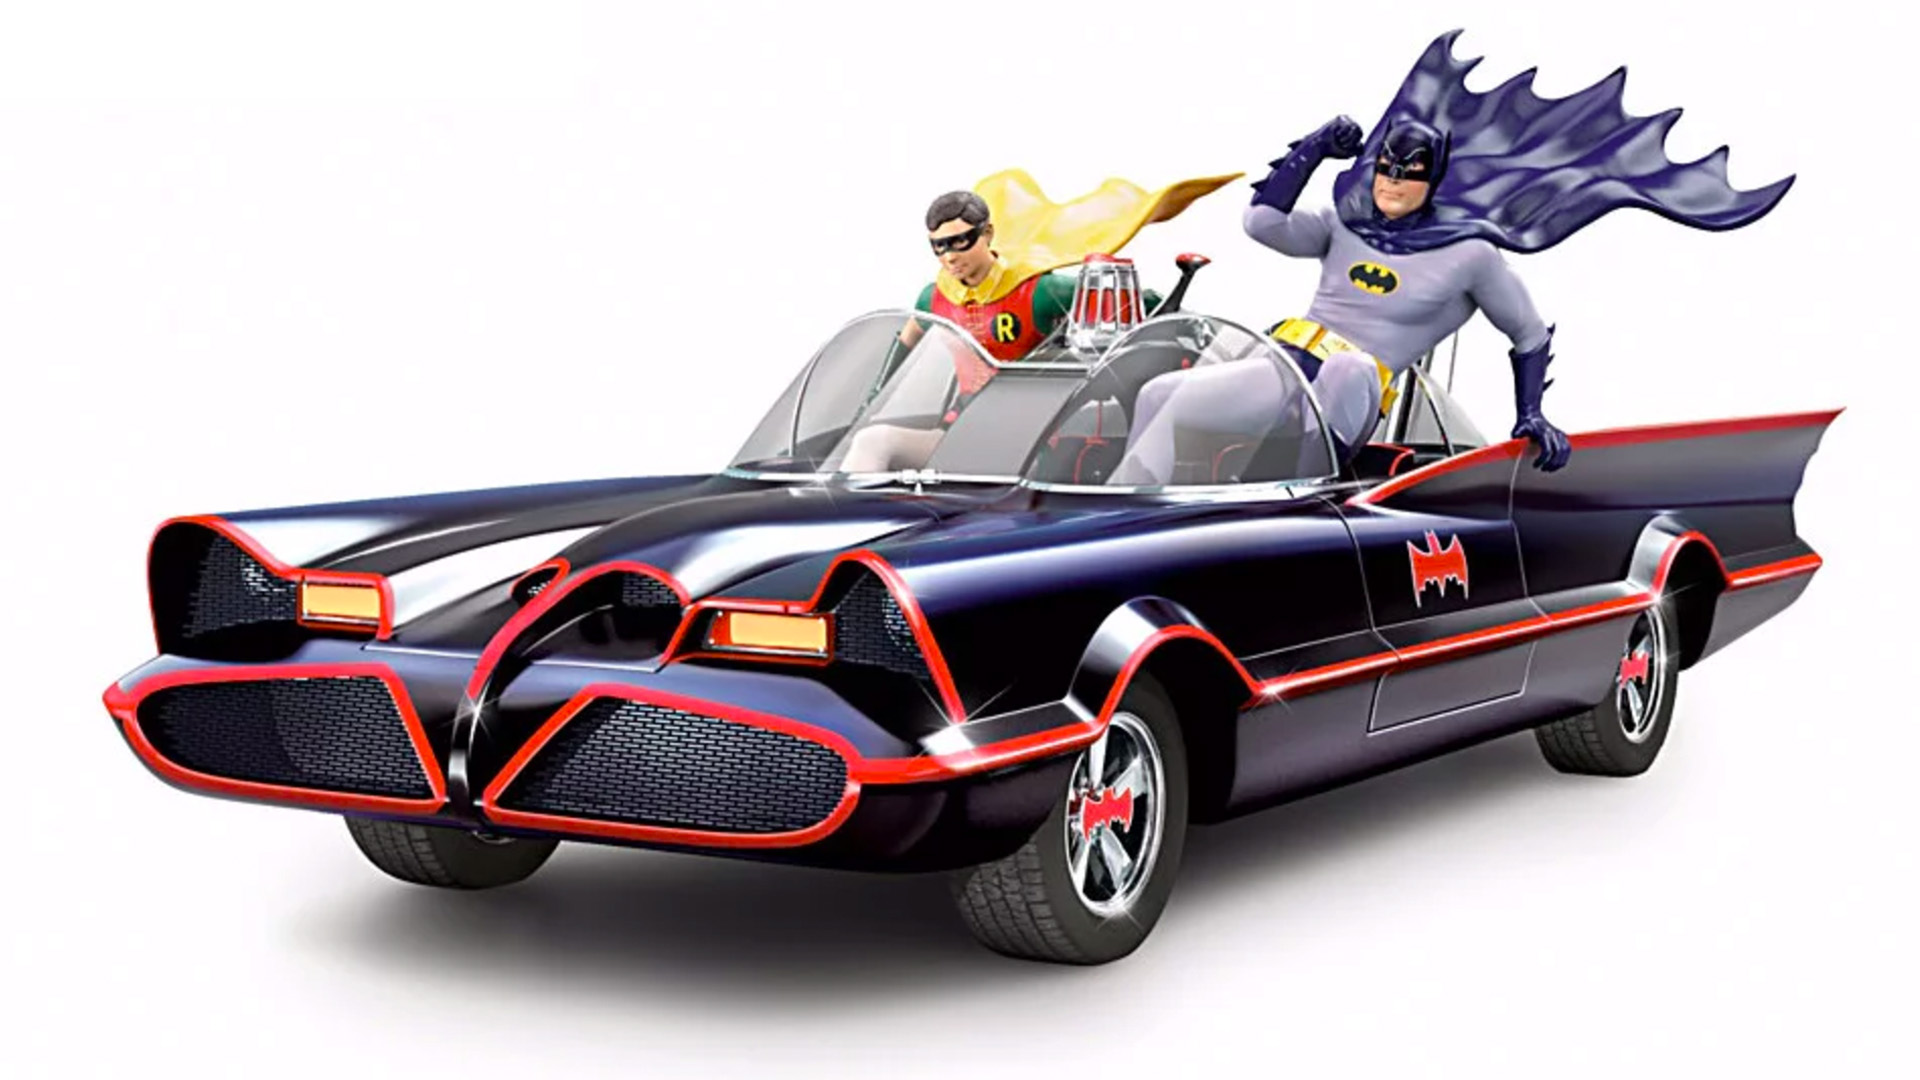 This Classic Batmobile Sculpture Also Plays the 1960s Theme Song —  GeekTyrant